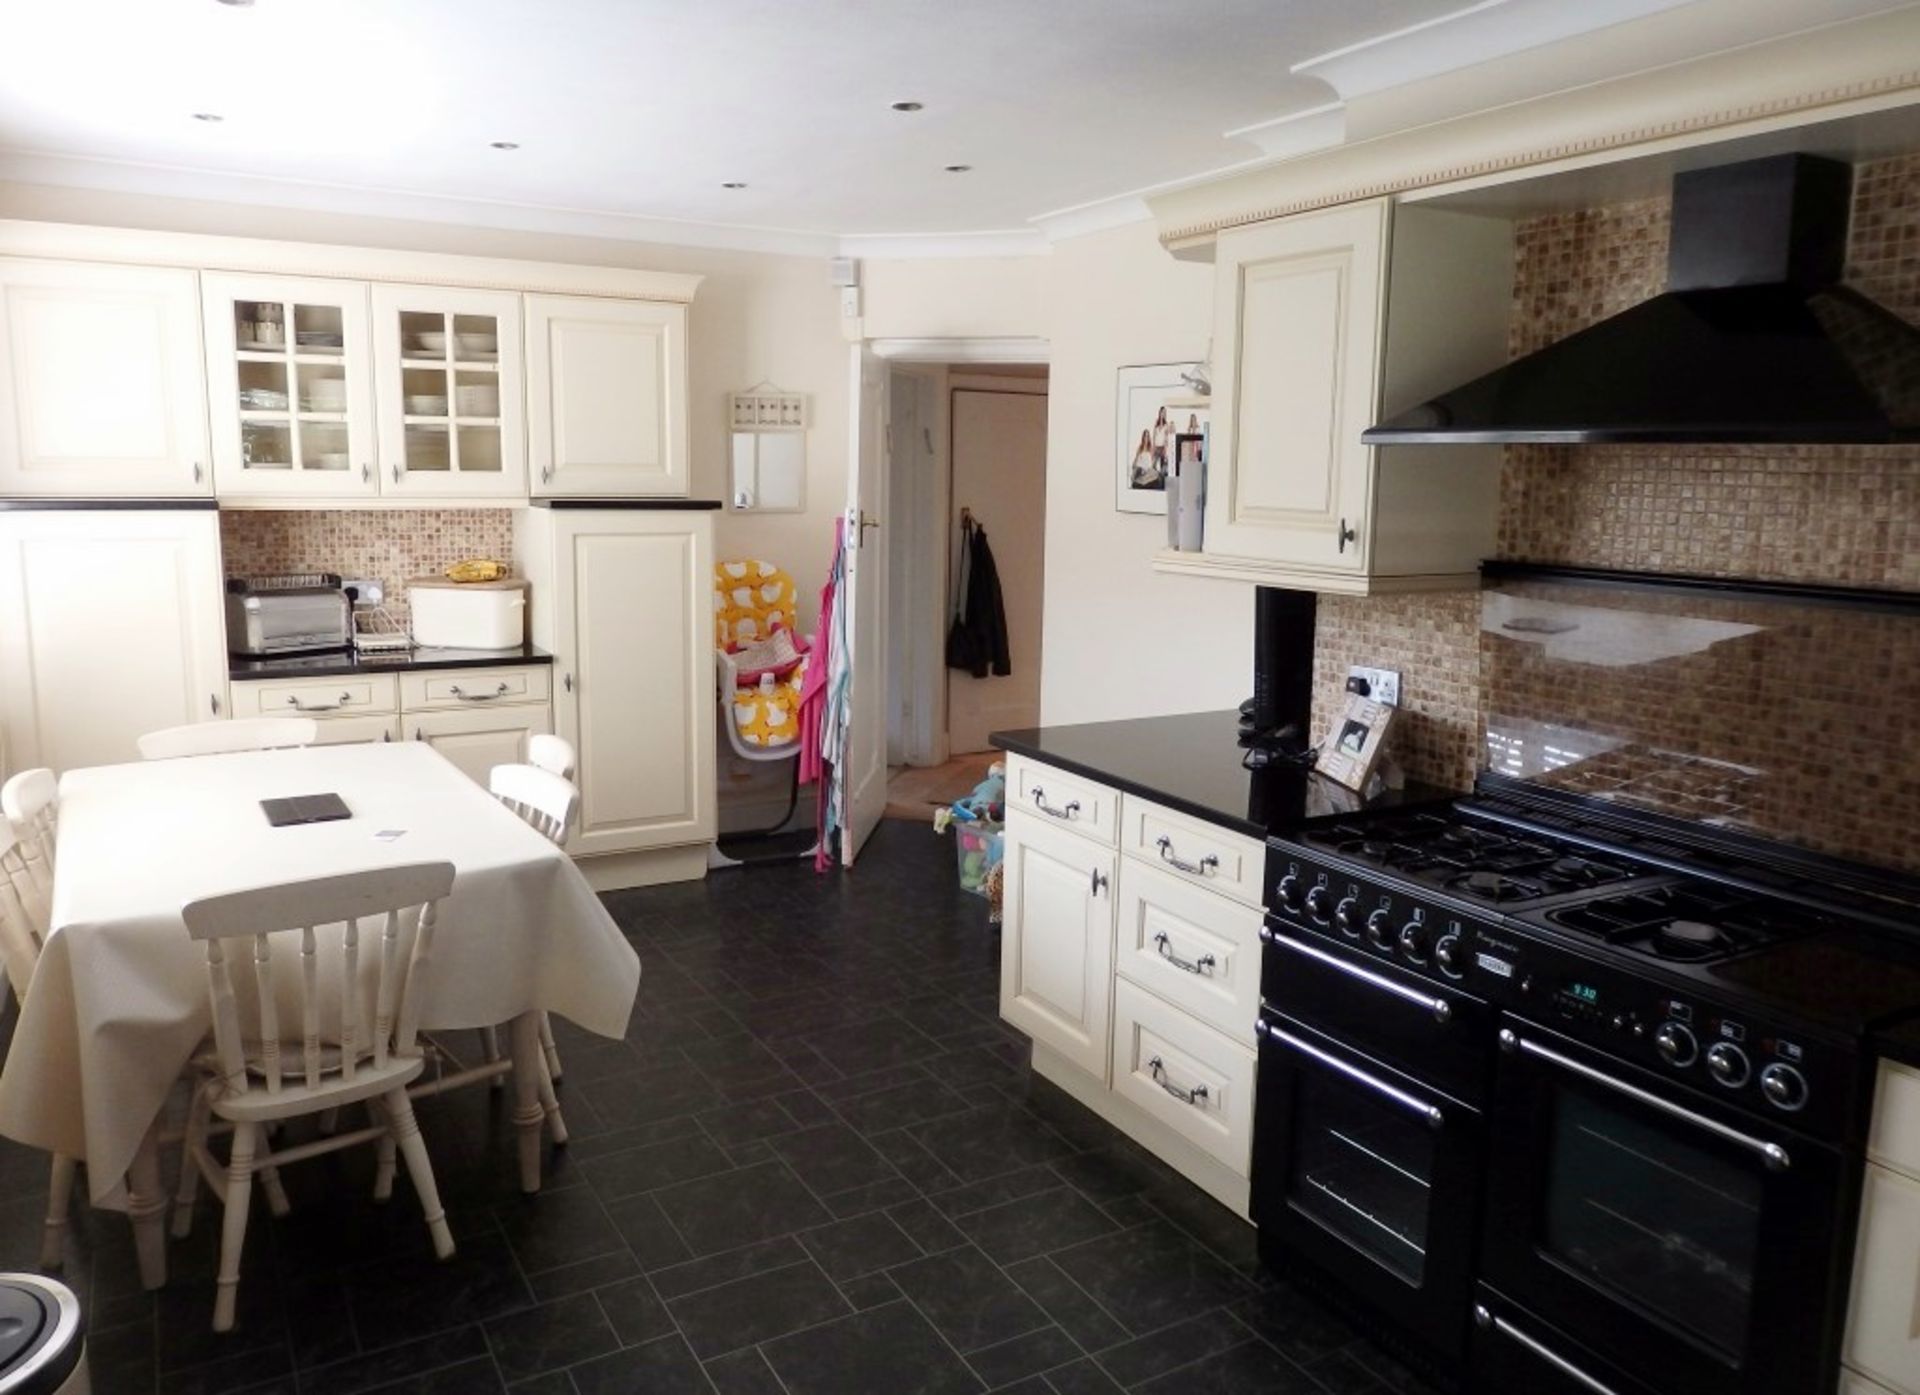 1 x Traditional Style Cream Kitchen With Luxurious Black Granite Worktops - Includes Freezer & - Image 2 of 31